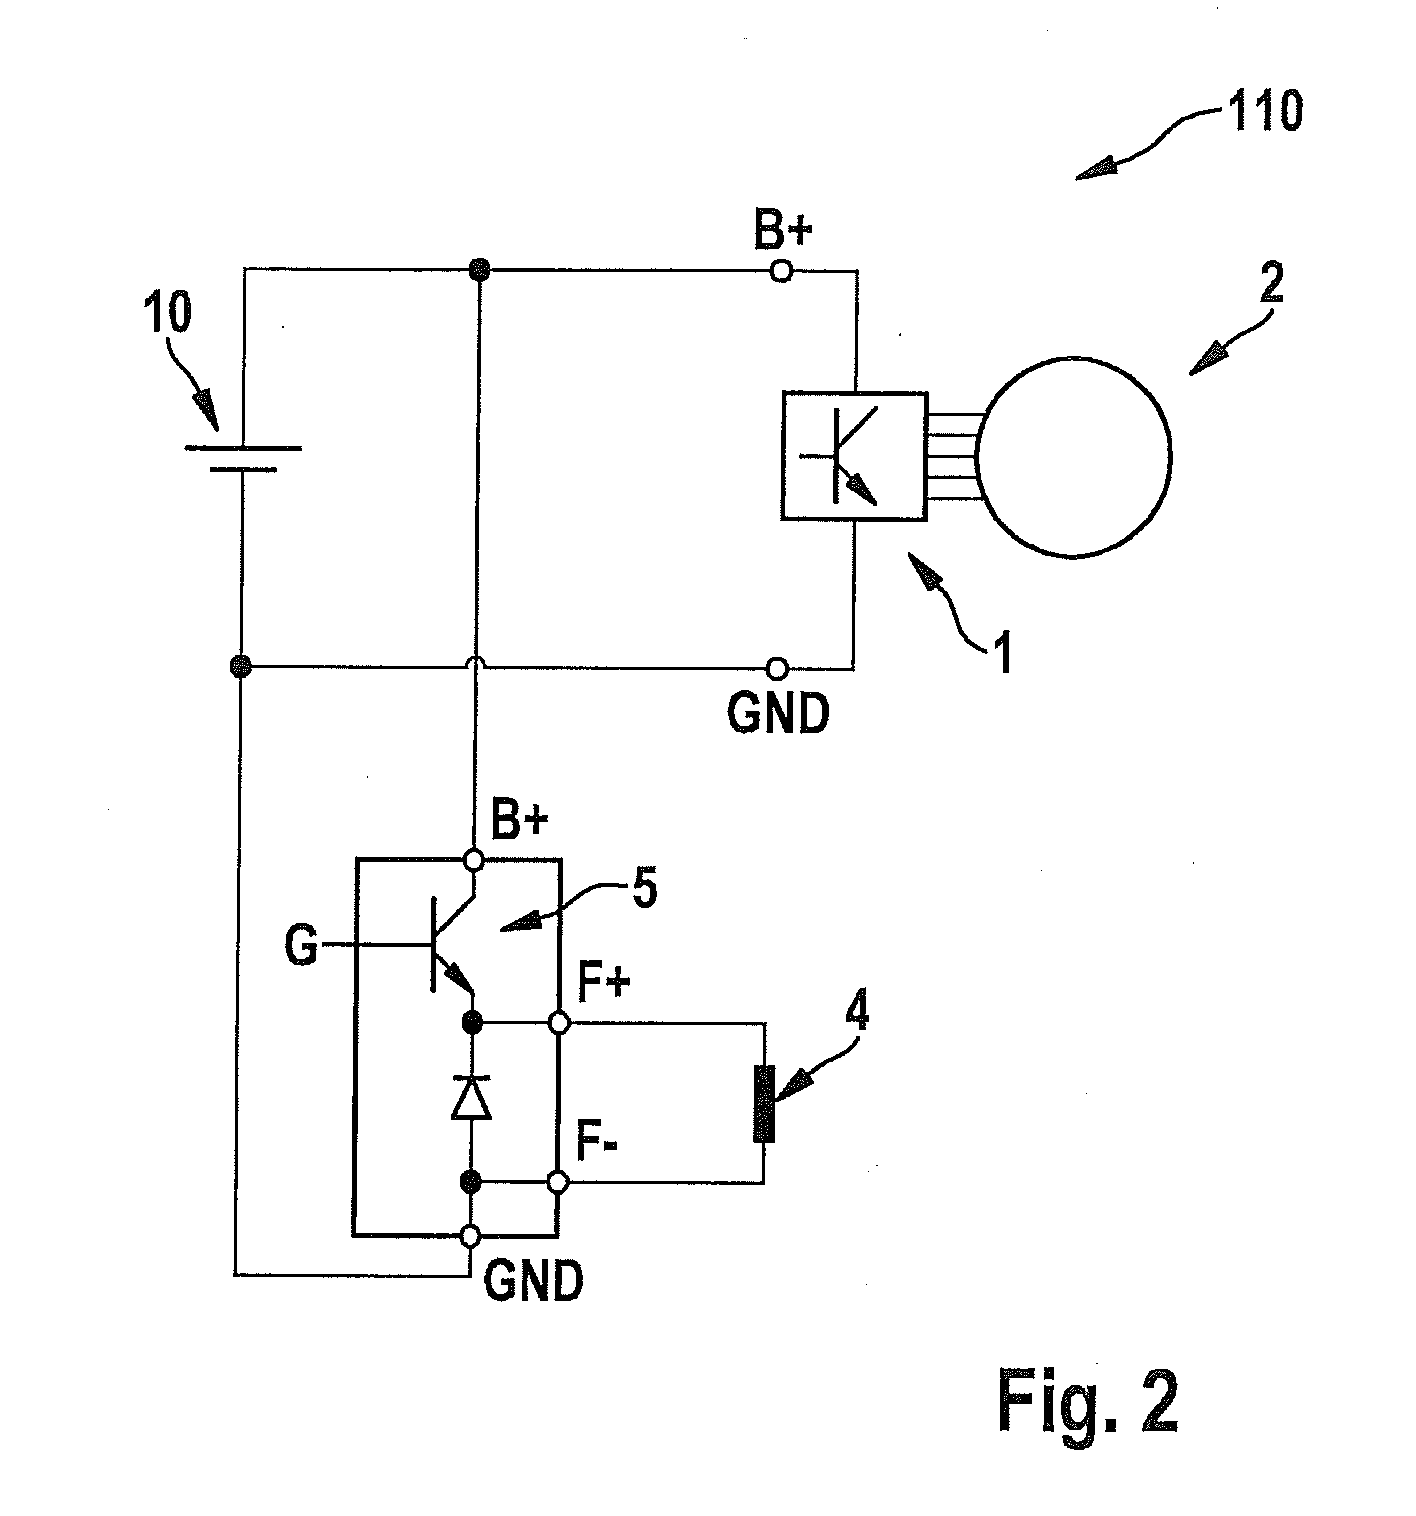 Method for operating a separately excited electric machine in a motor vehicle